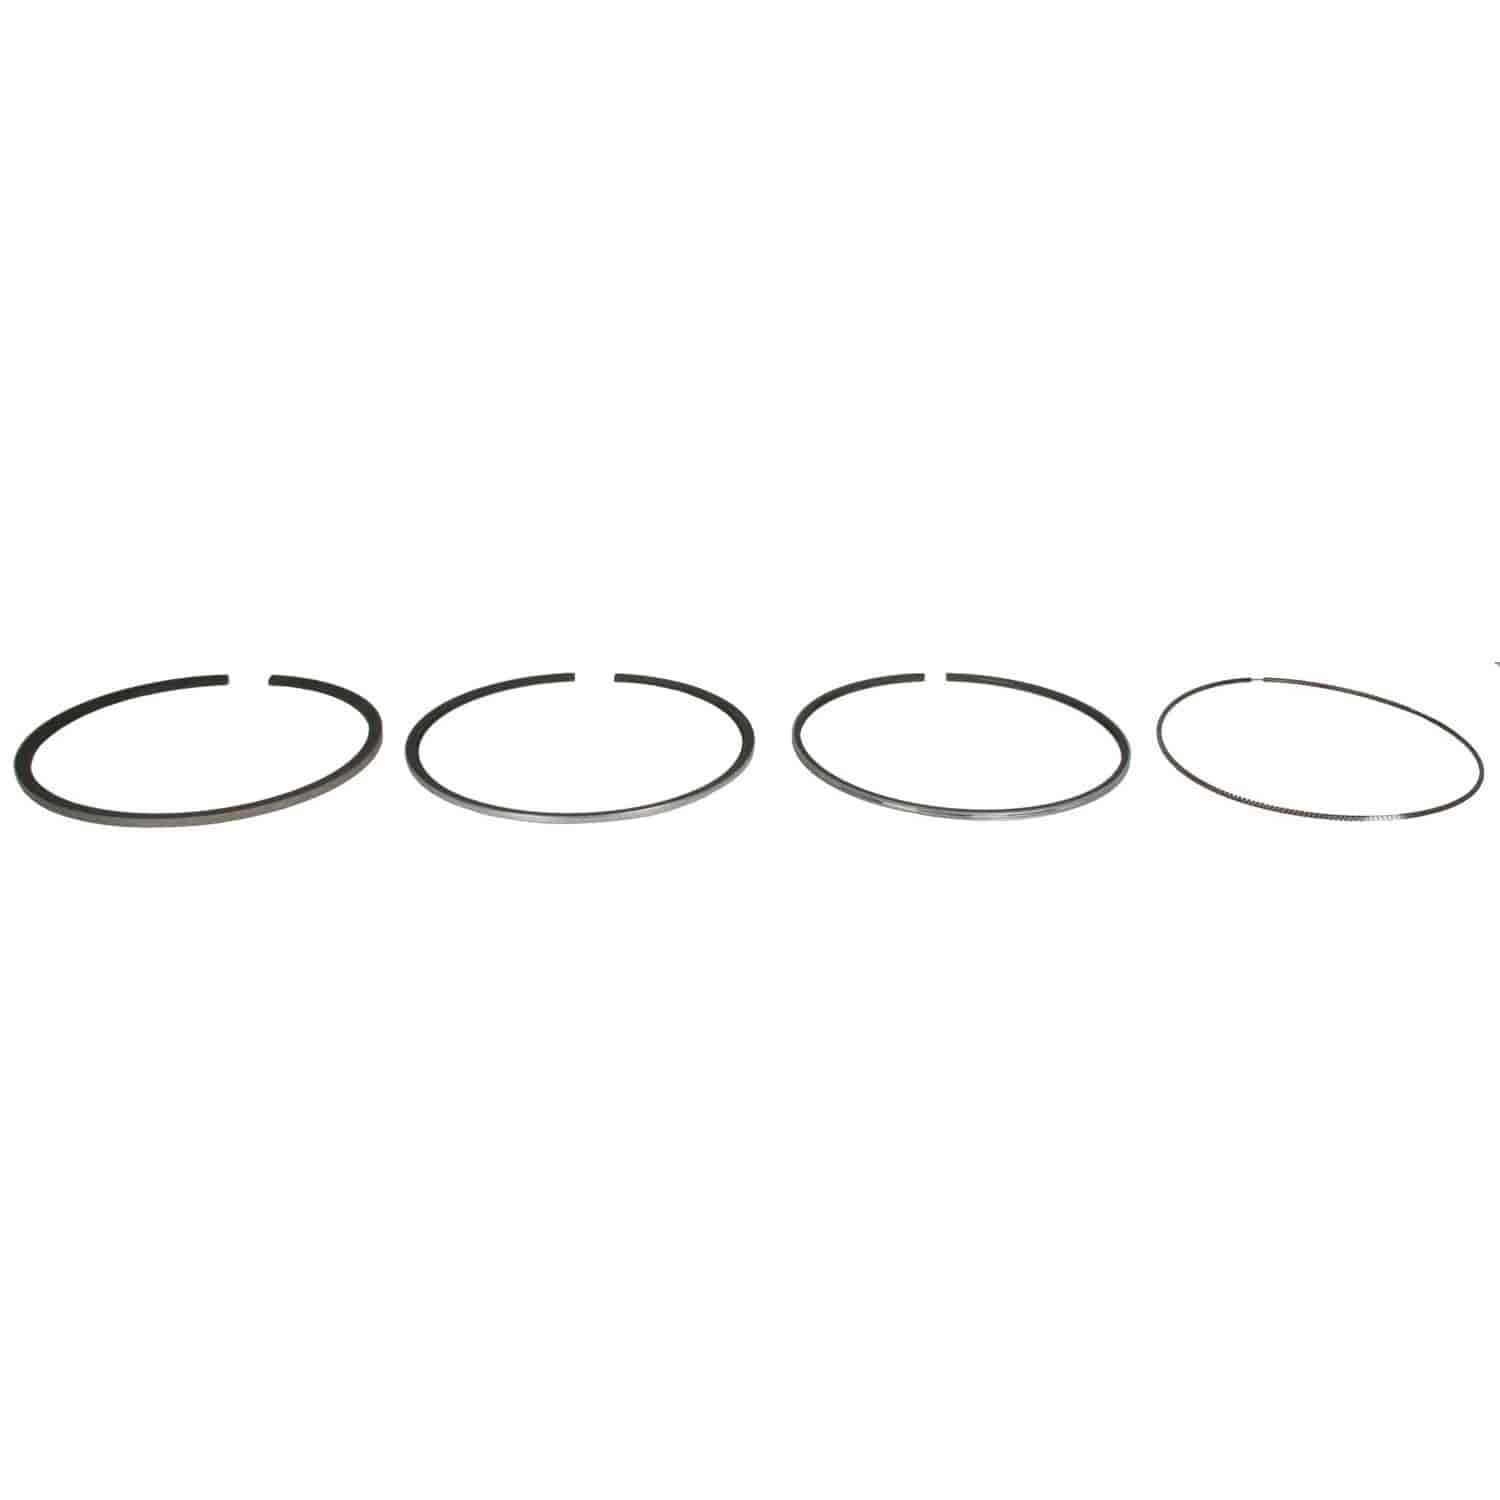 Sleeve Assembly Ring Set Caterpillar 3406 6 cyl. Top Ring Replacement for Titanium O.E. Ring